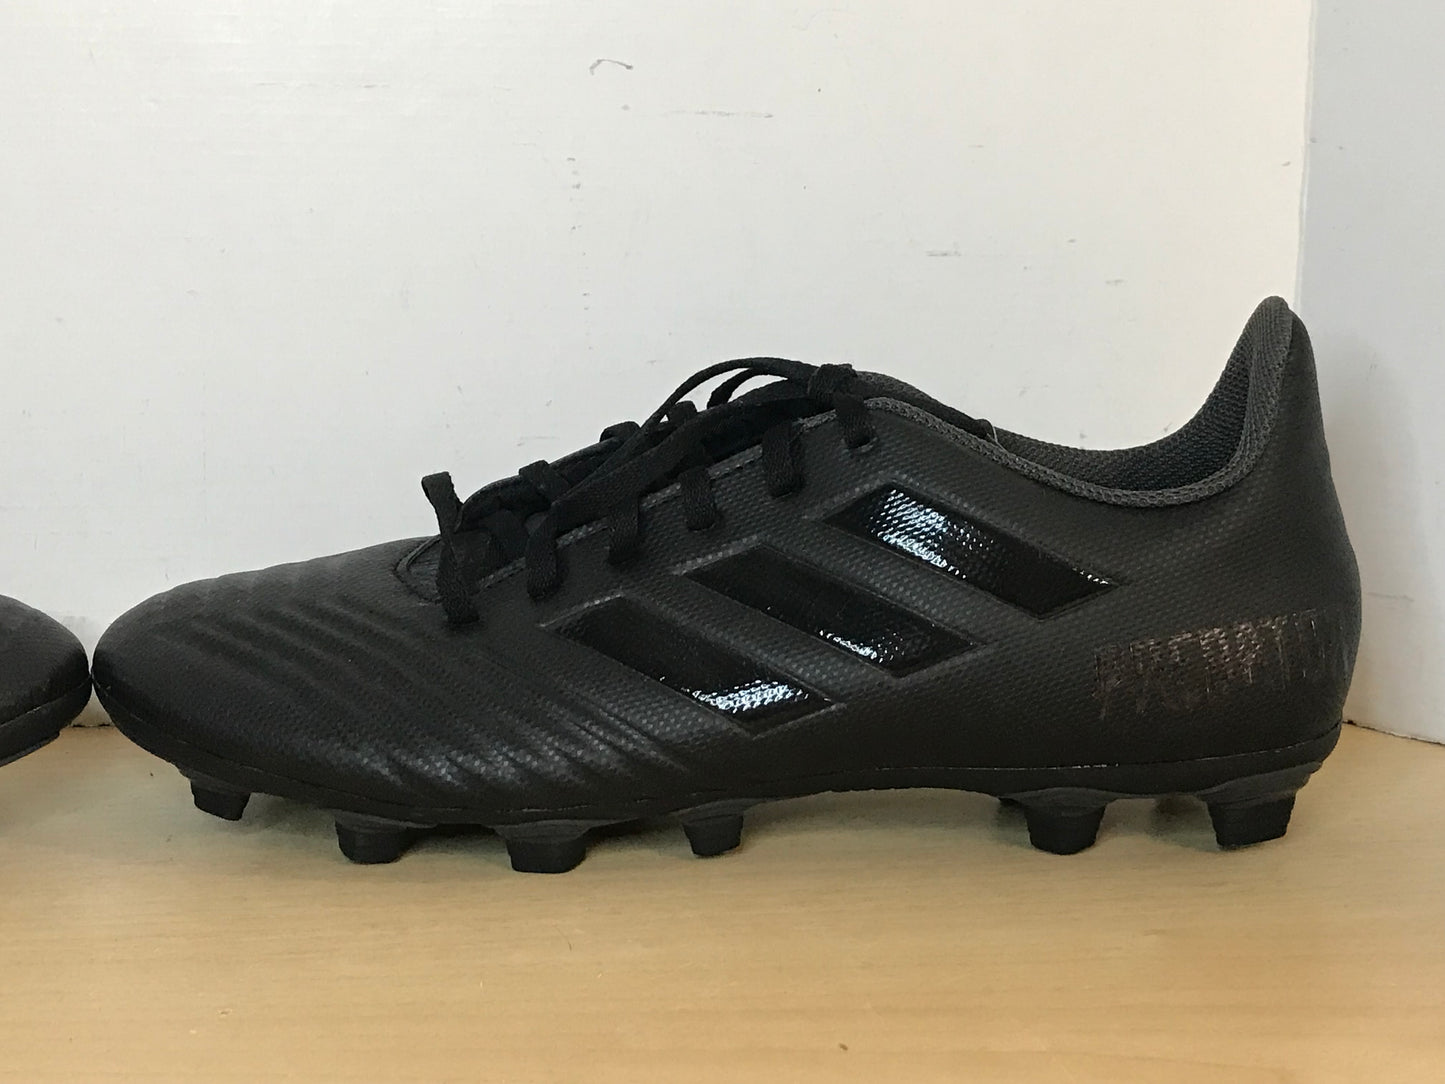 Soccer Shoes Cleats Men's Size 10 Adidas Preditor Black